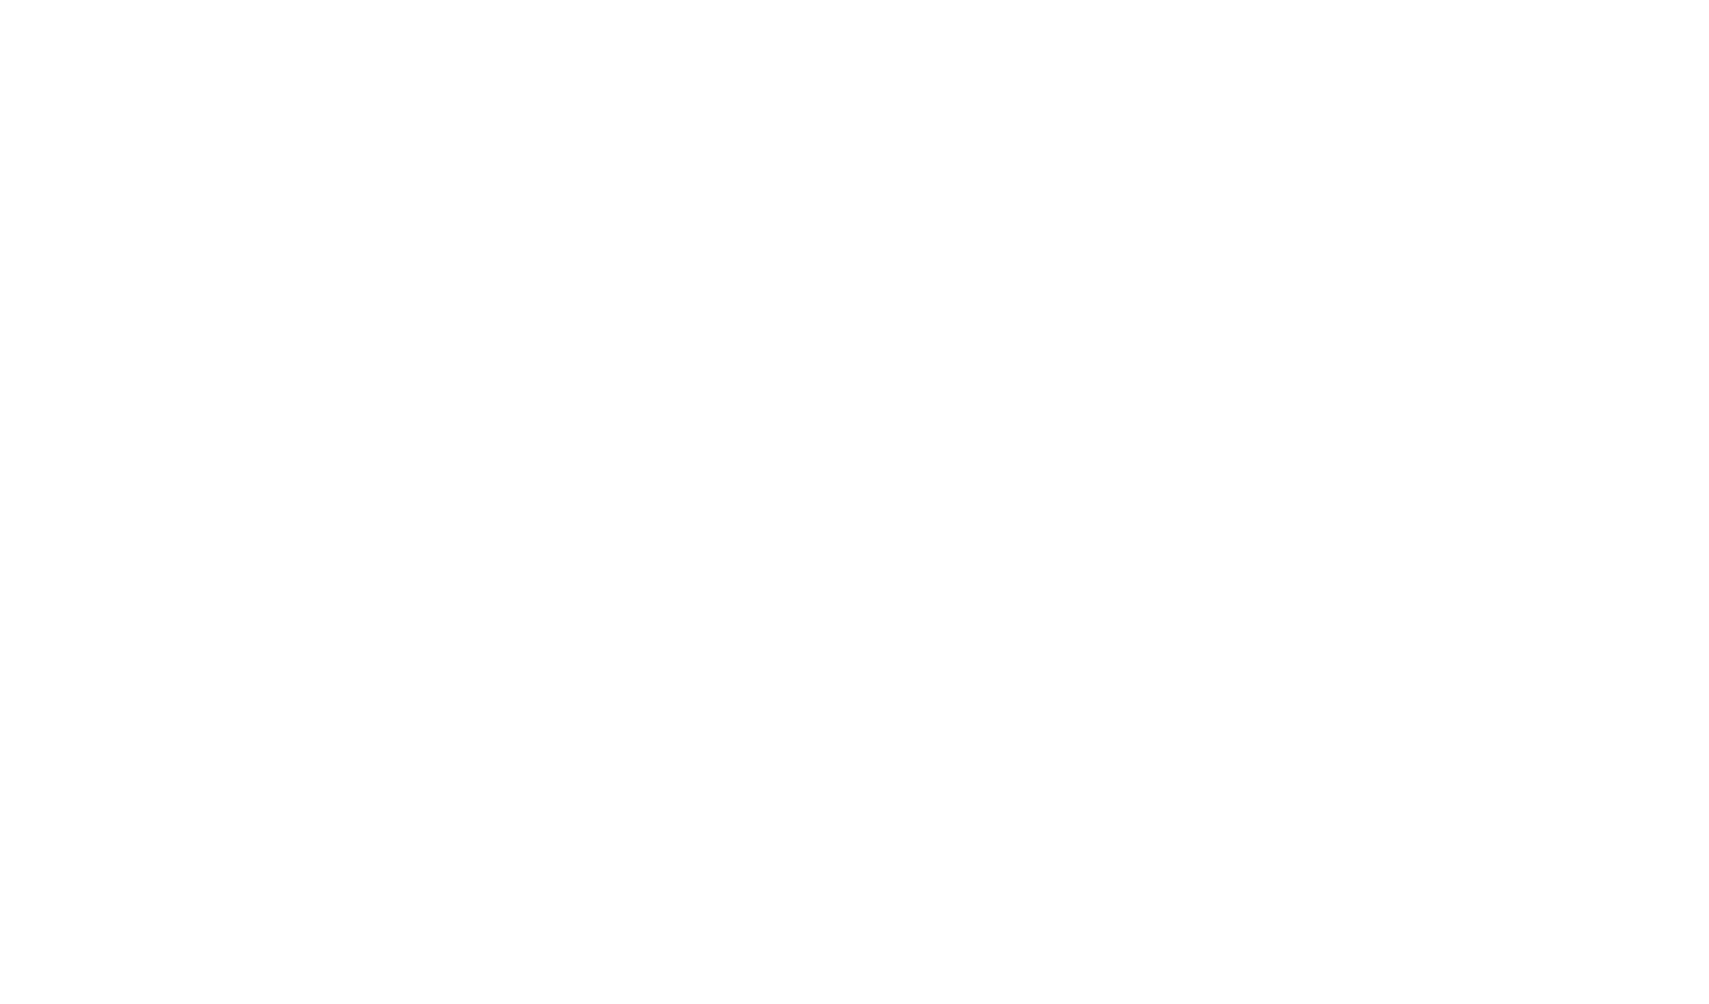 Oxbryta® (voxelotor) 300 mg Tablets, 500 mg Tablets and 300 mg Tablets for Oral Suspension Logo